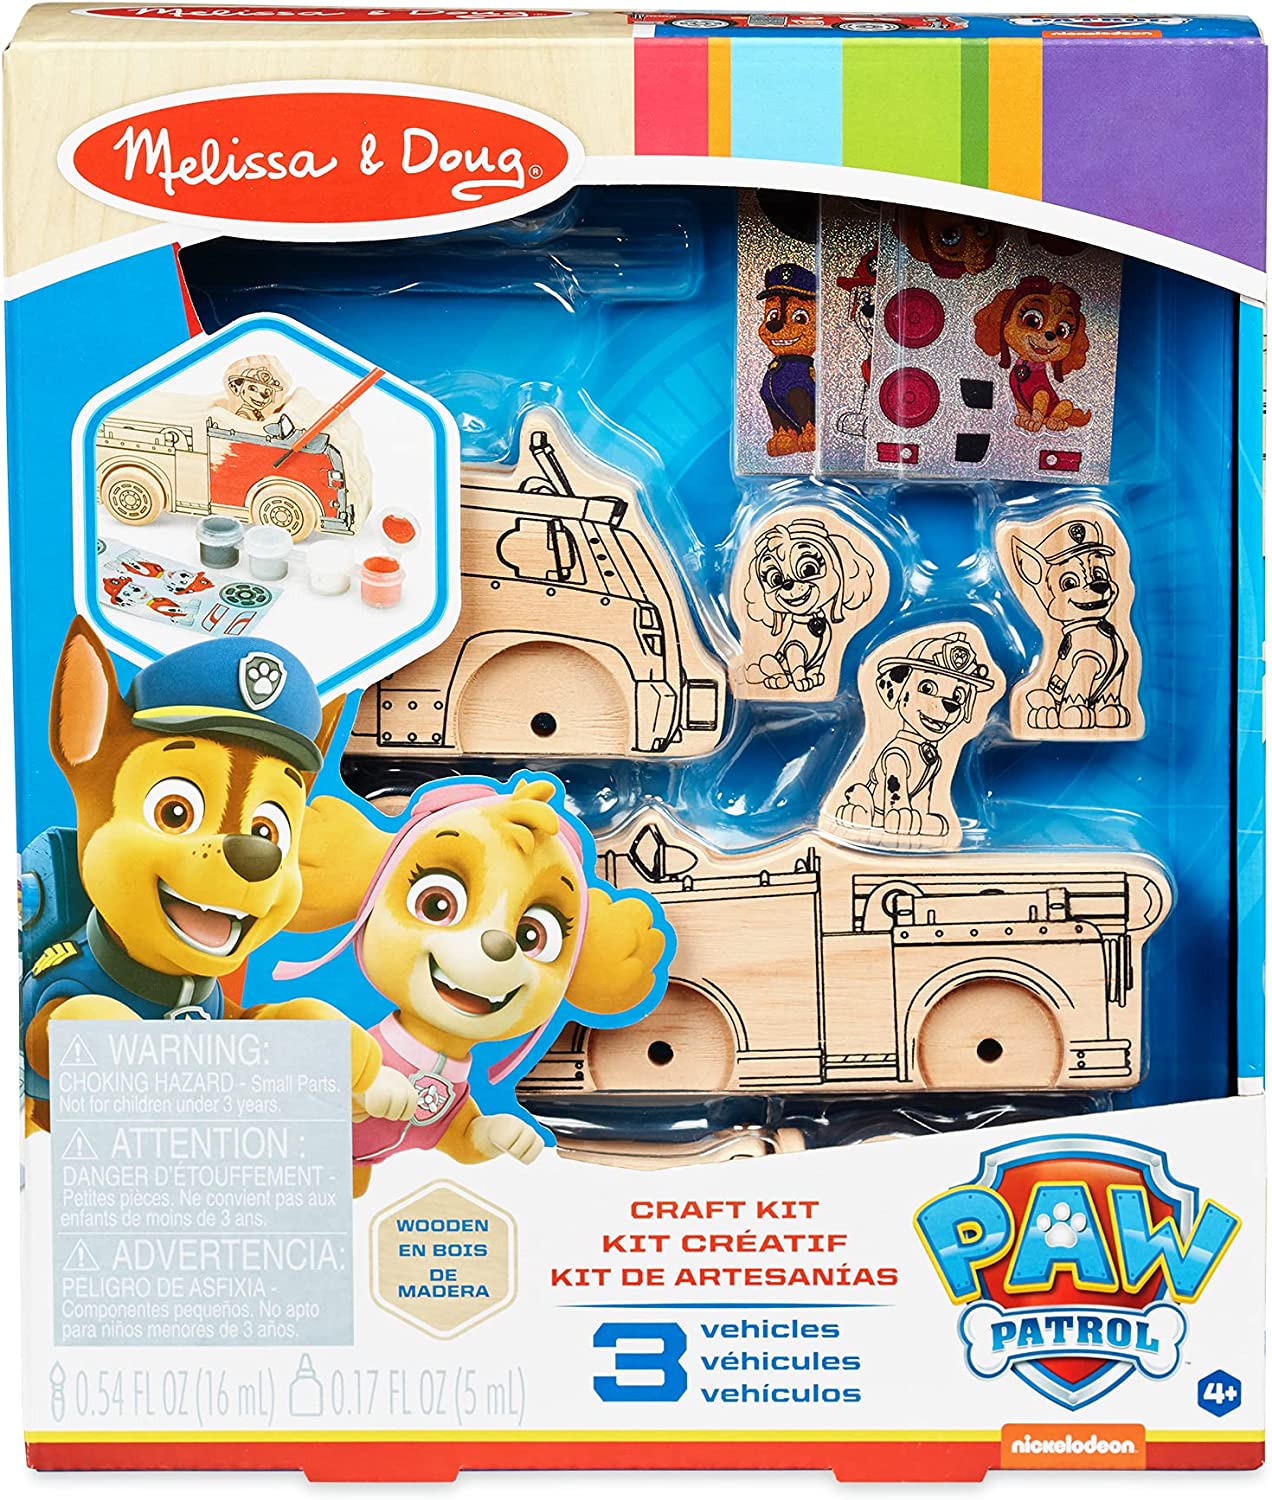 Melissa & Doug PAW Patrol Wooden Vehicles Craft Kit w/ 3 Figures $11.34 + Free Shipping w/ Prime or Orders $25+